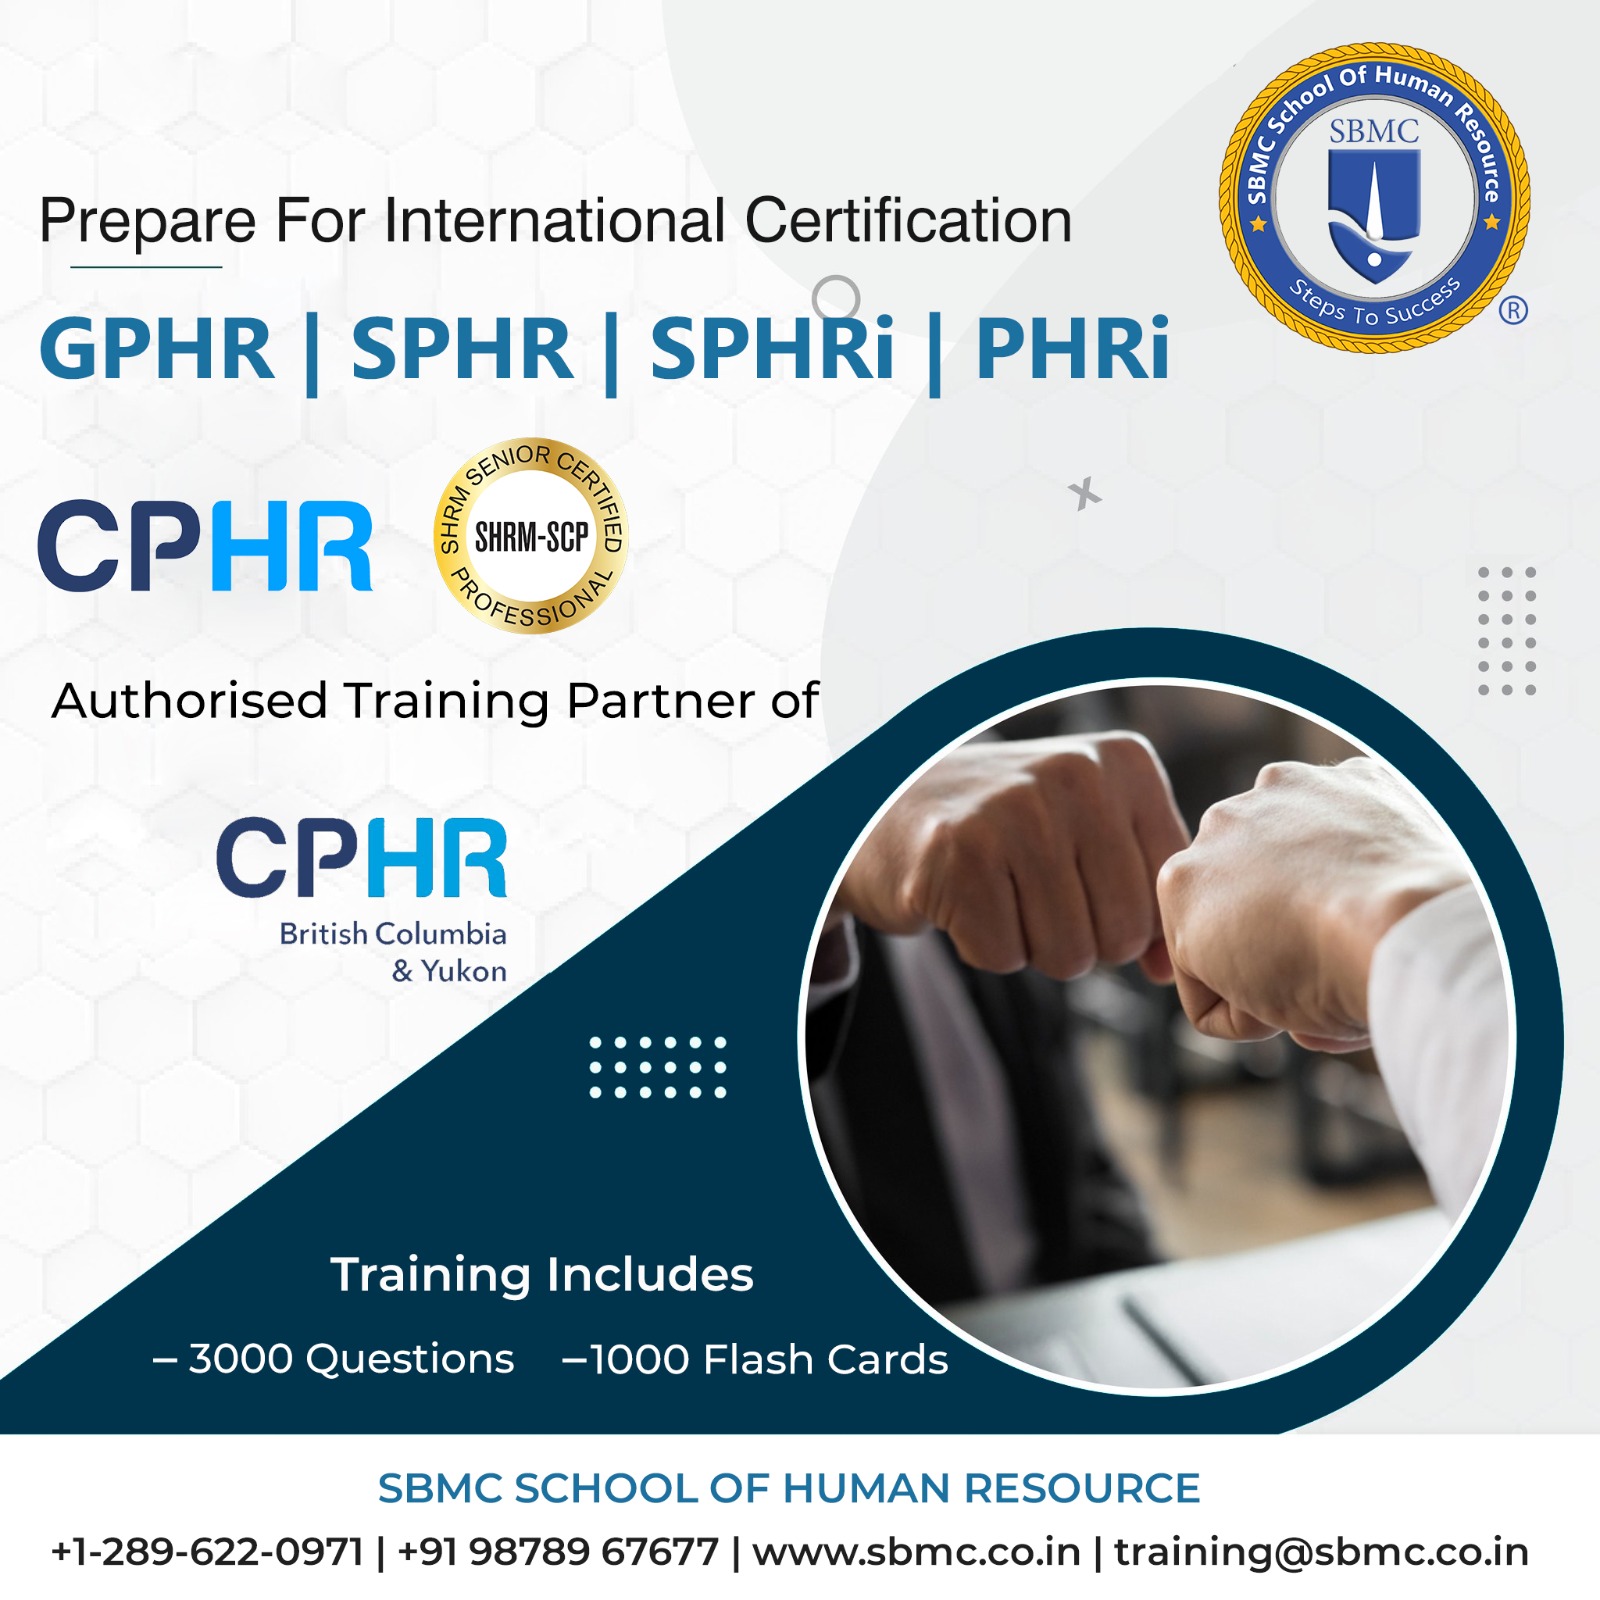  chartered professional in human resources, shrm sphr, cp hr services, hrci phr exam, sphr course, cp scp, shrm scp certification, society for human resource management, sphr certification cost, shrm society for human resource management